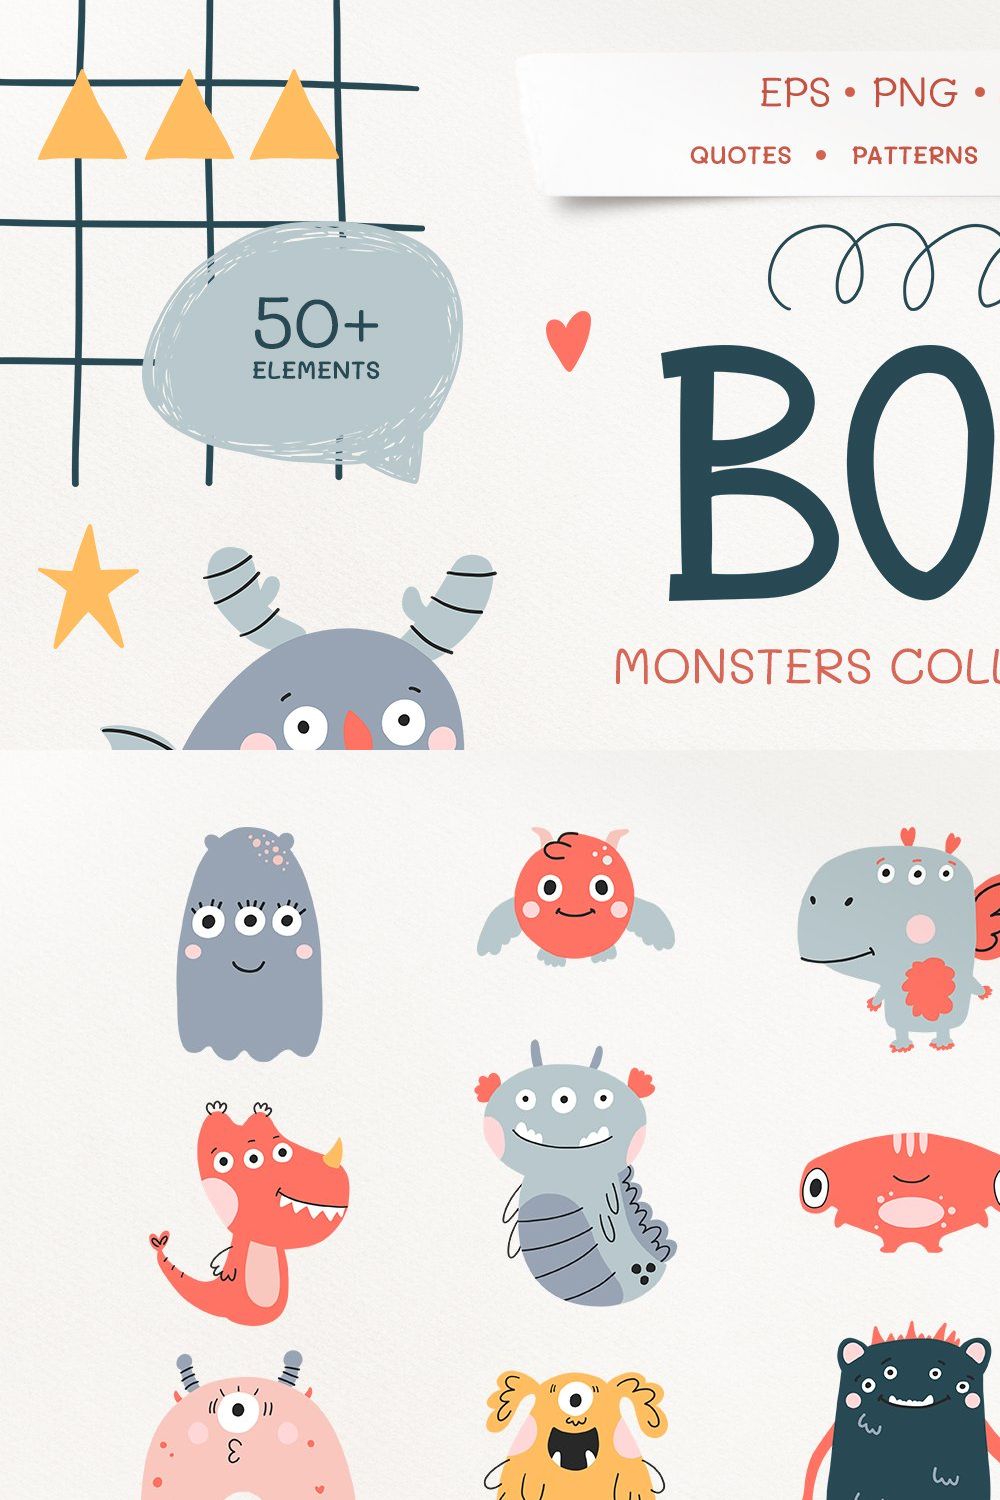 Boo - cute monsters collection pinterest preview image.